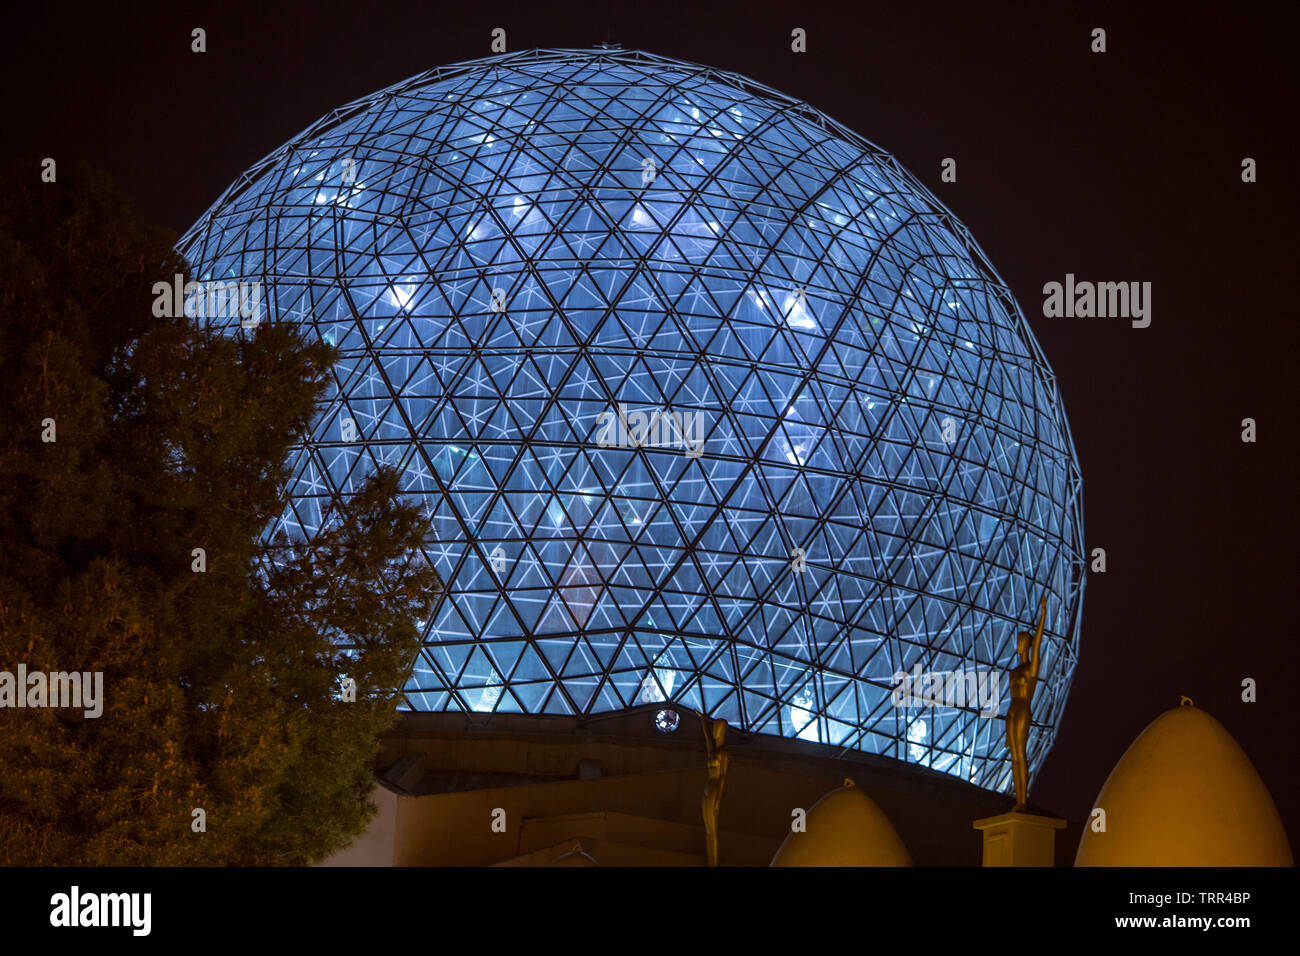 Illuminated geodesic dome on top of the Salvador Dali Museum  in Figueres Catalonia Spain Stock Photo